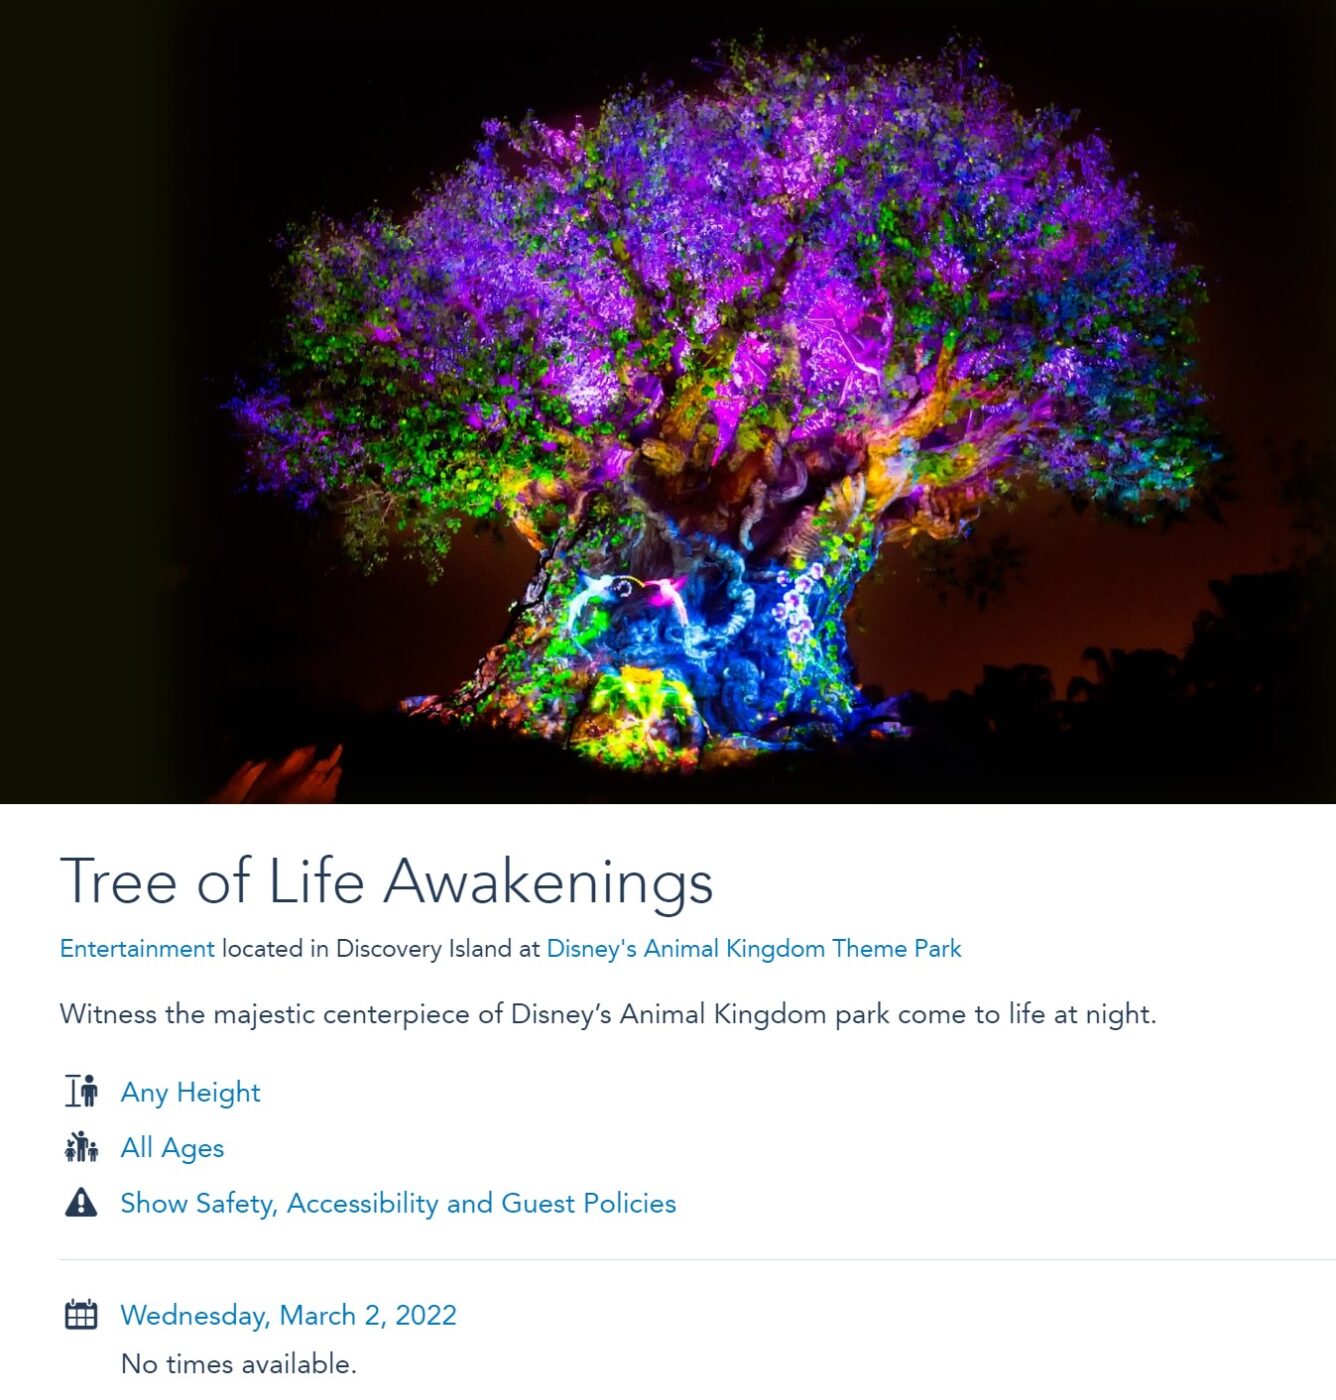 Tree of Life Awakenings Canceled for Select Dates in Early March